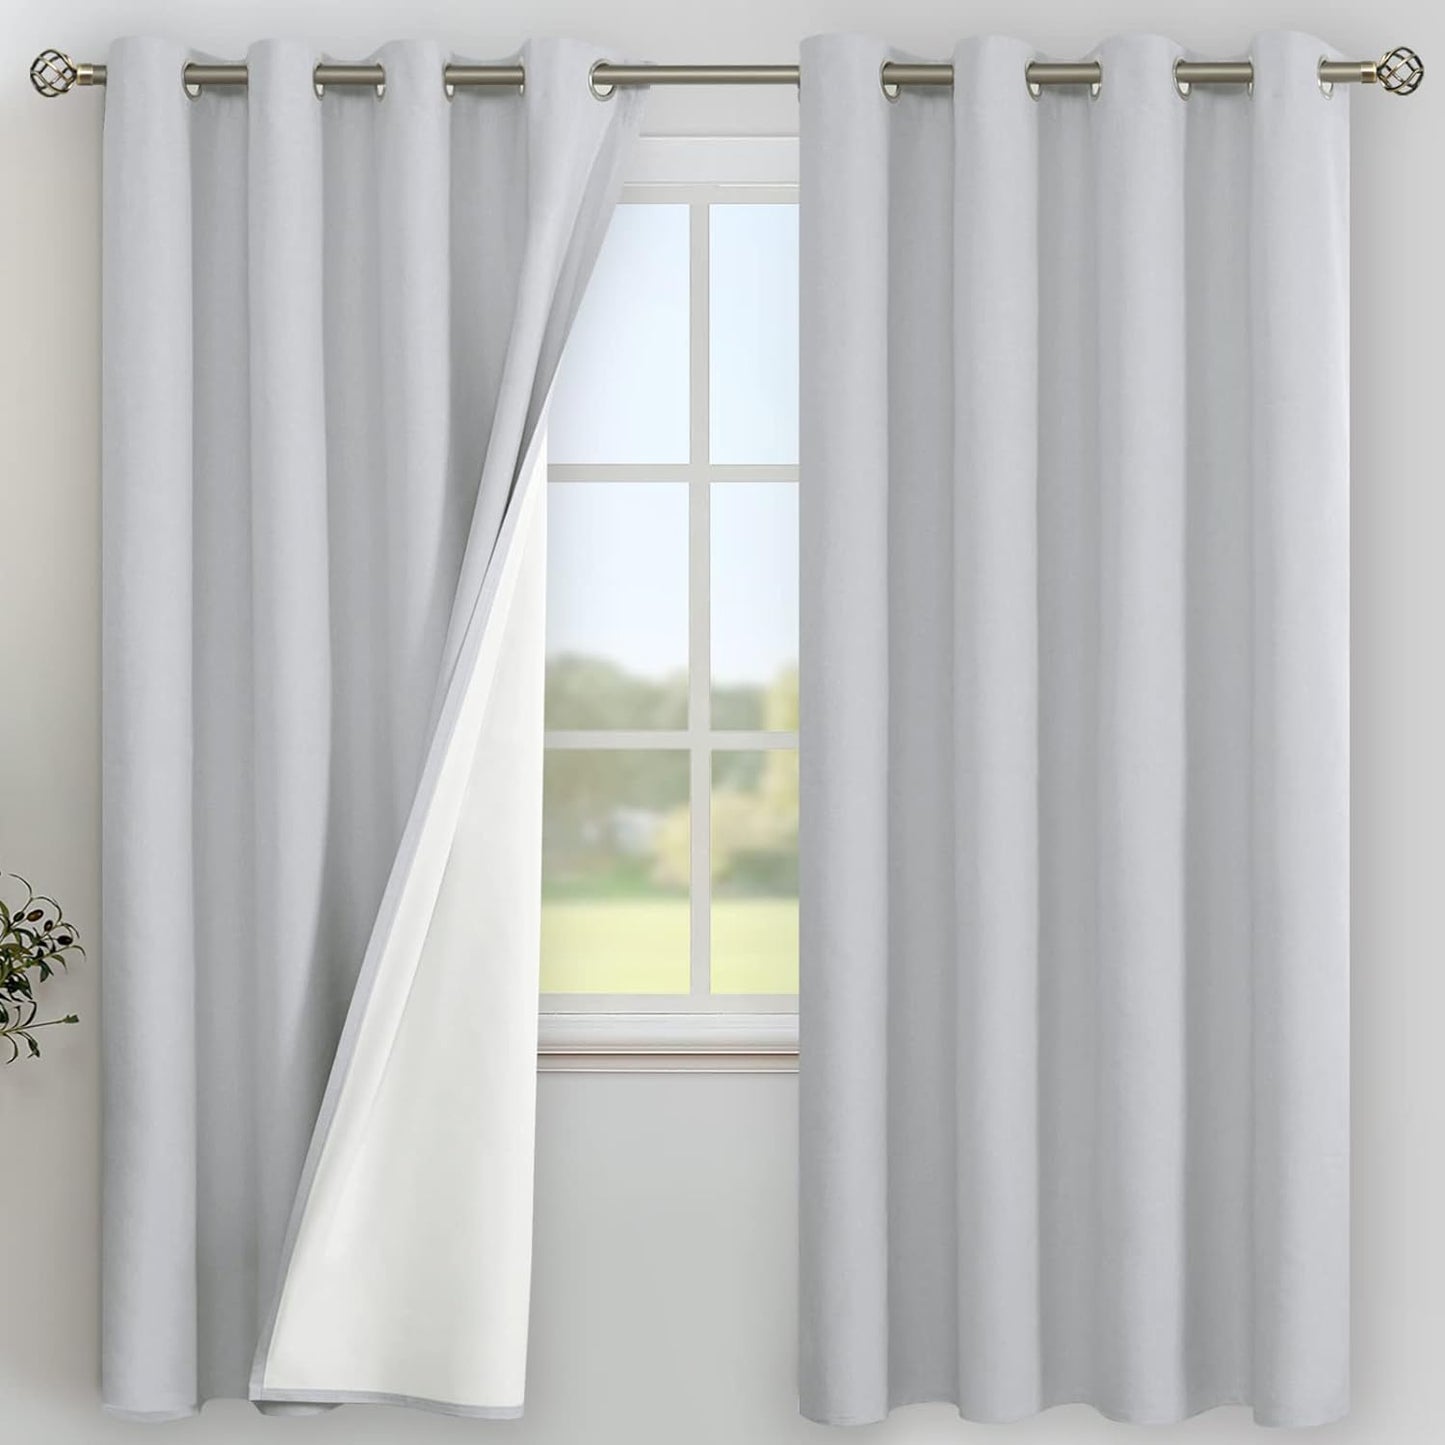 Youngstex Linen Blackout Curtains 63 Inches Long, Grommet Full Room Darkening Linen Window Drapes Thermal Insulated for Living Room Bedroom, 2 Panels, 52 X 63 Inch, Linen  YoungsTex Light Grey 52W X 72L 